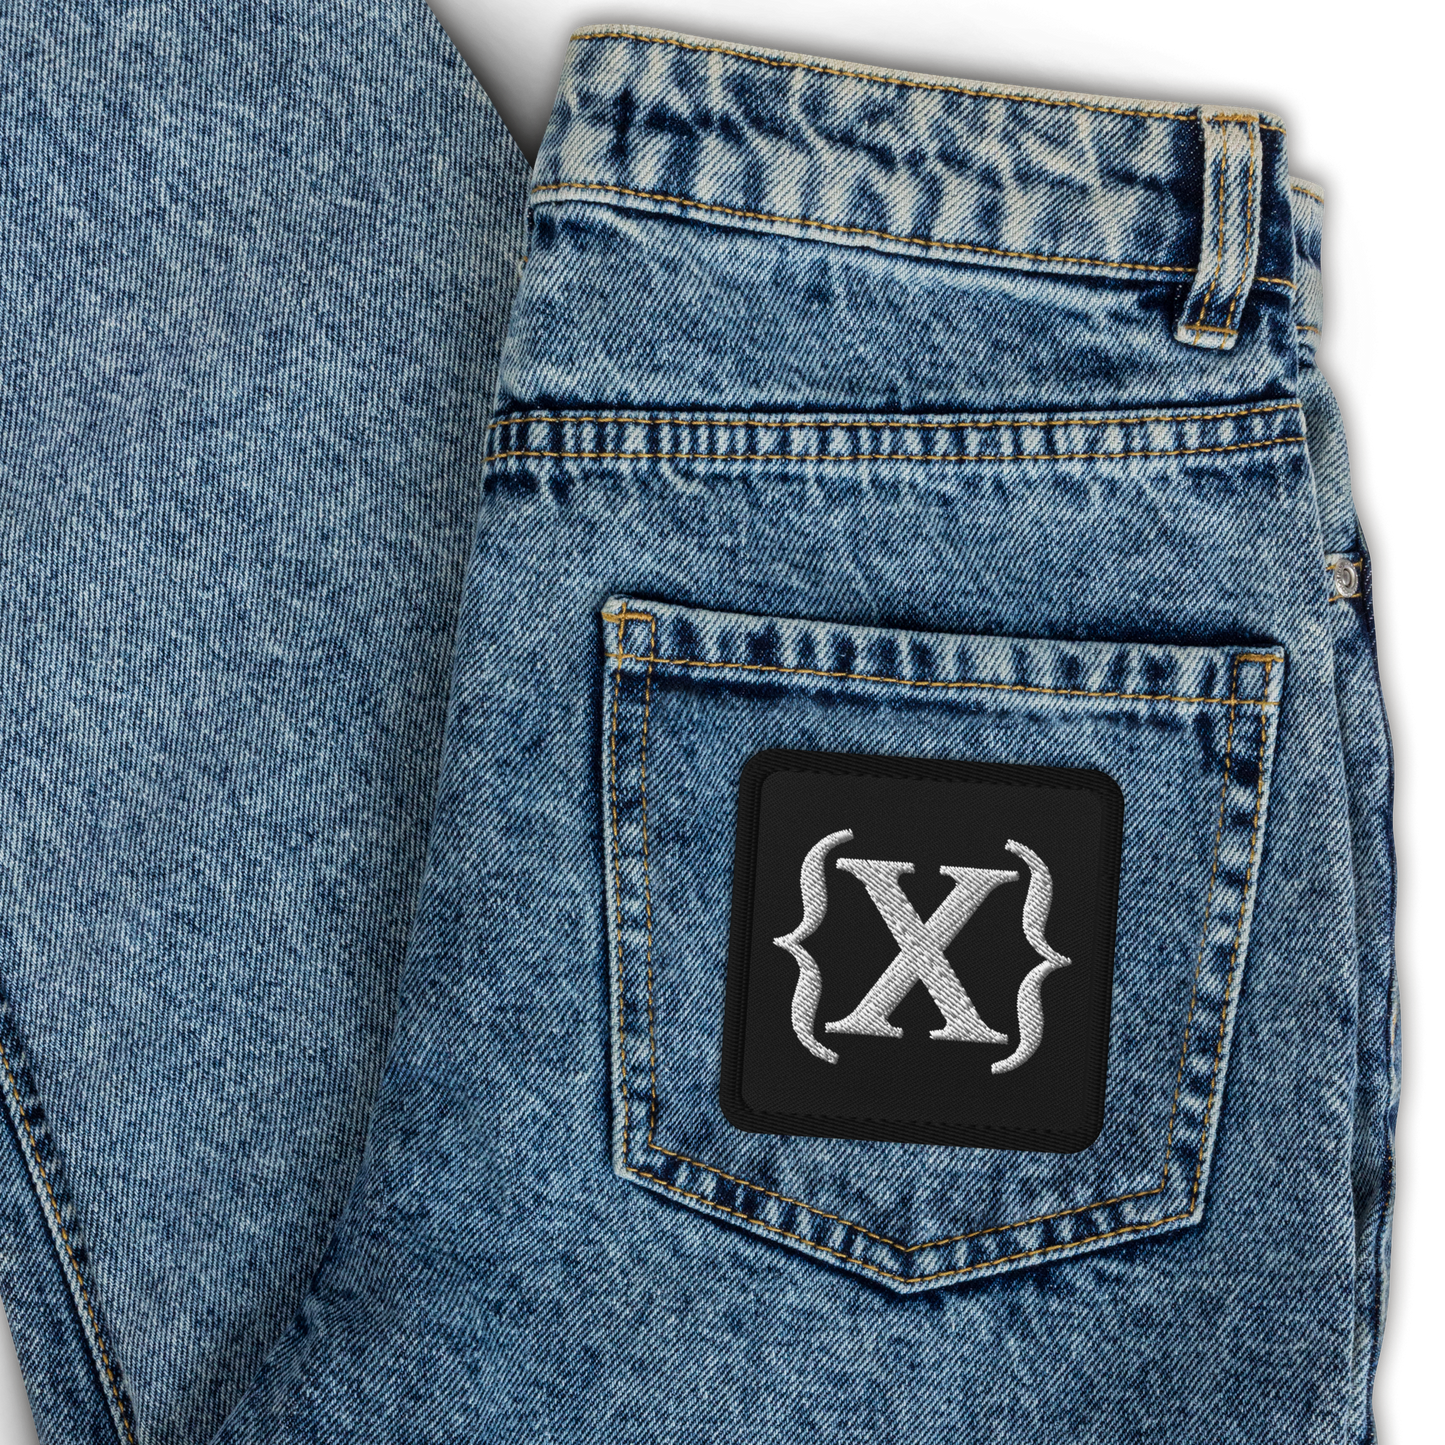 Embroidered Patch - {X} - Square